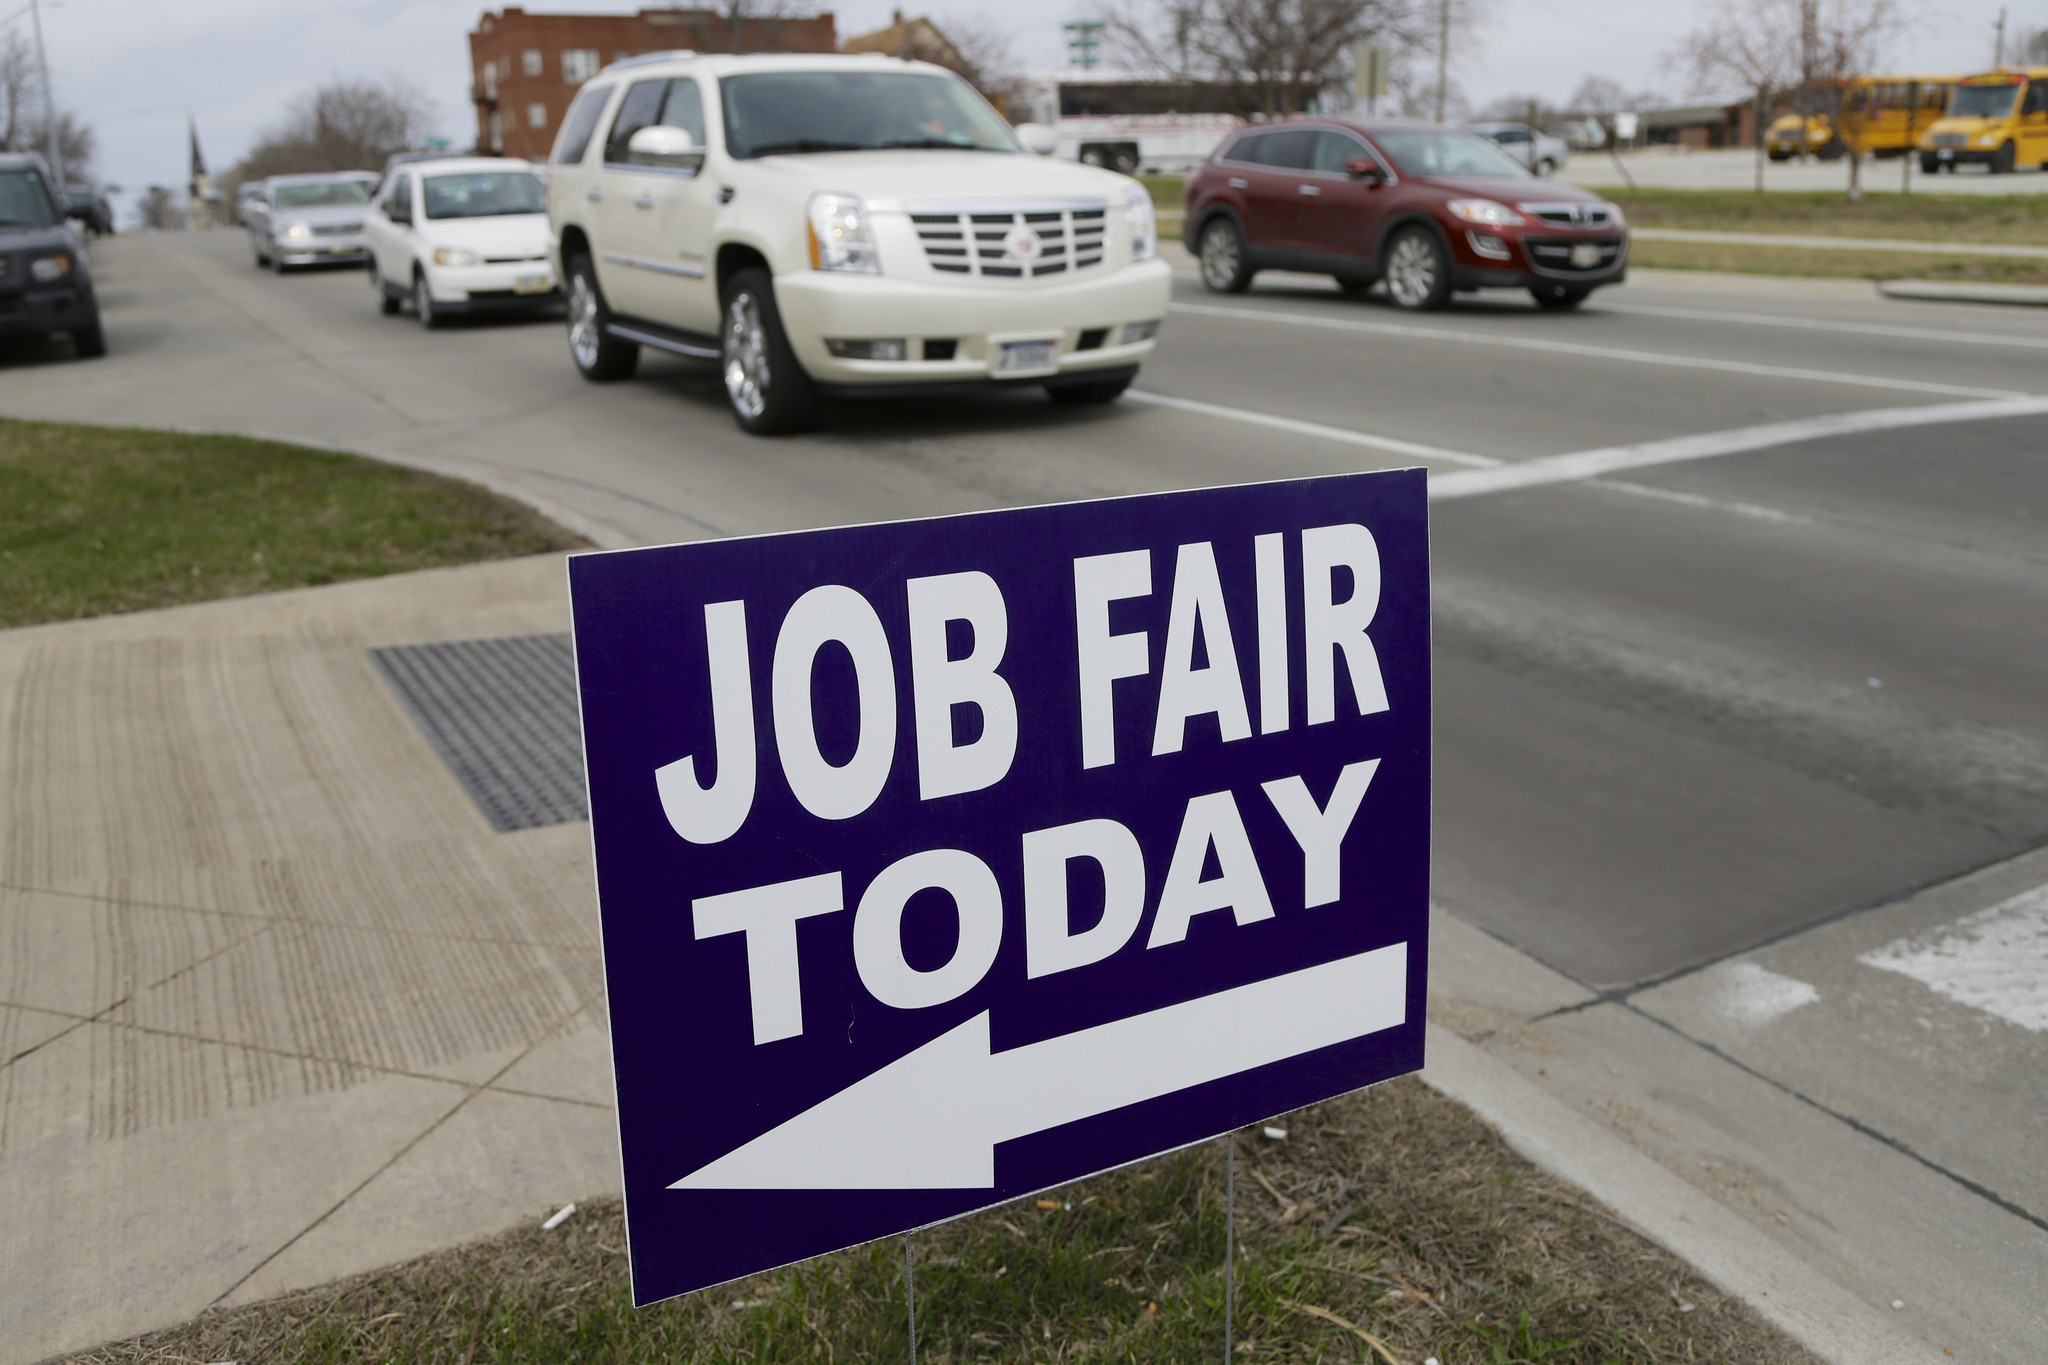 Weekly jobless claims fall as